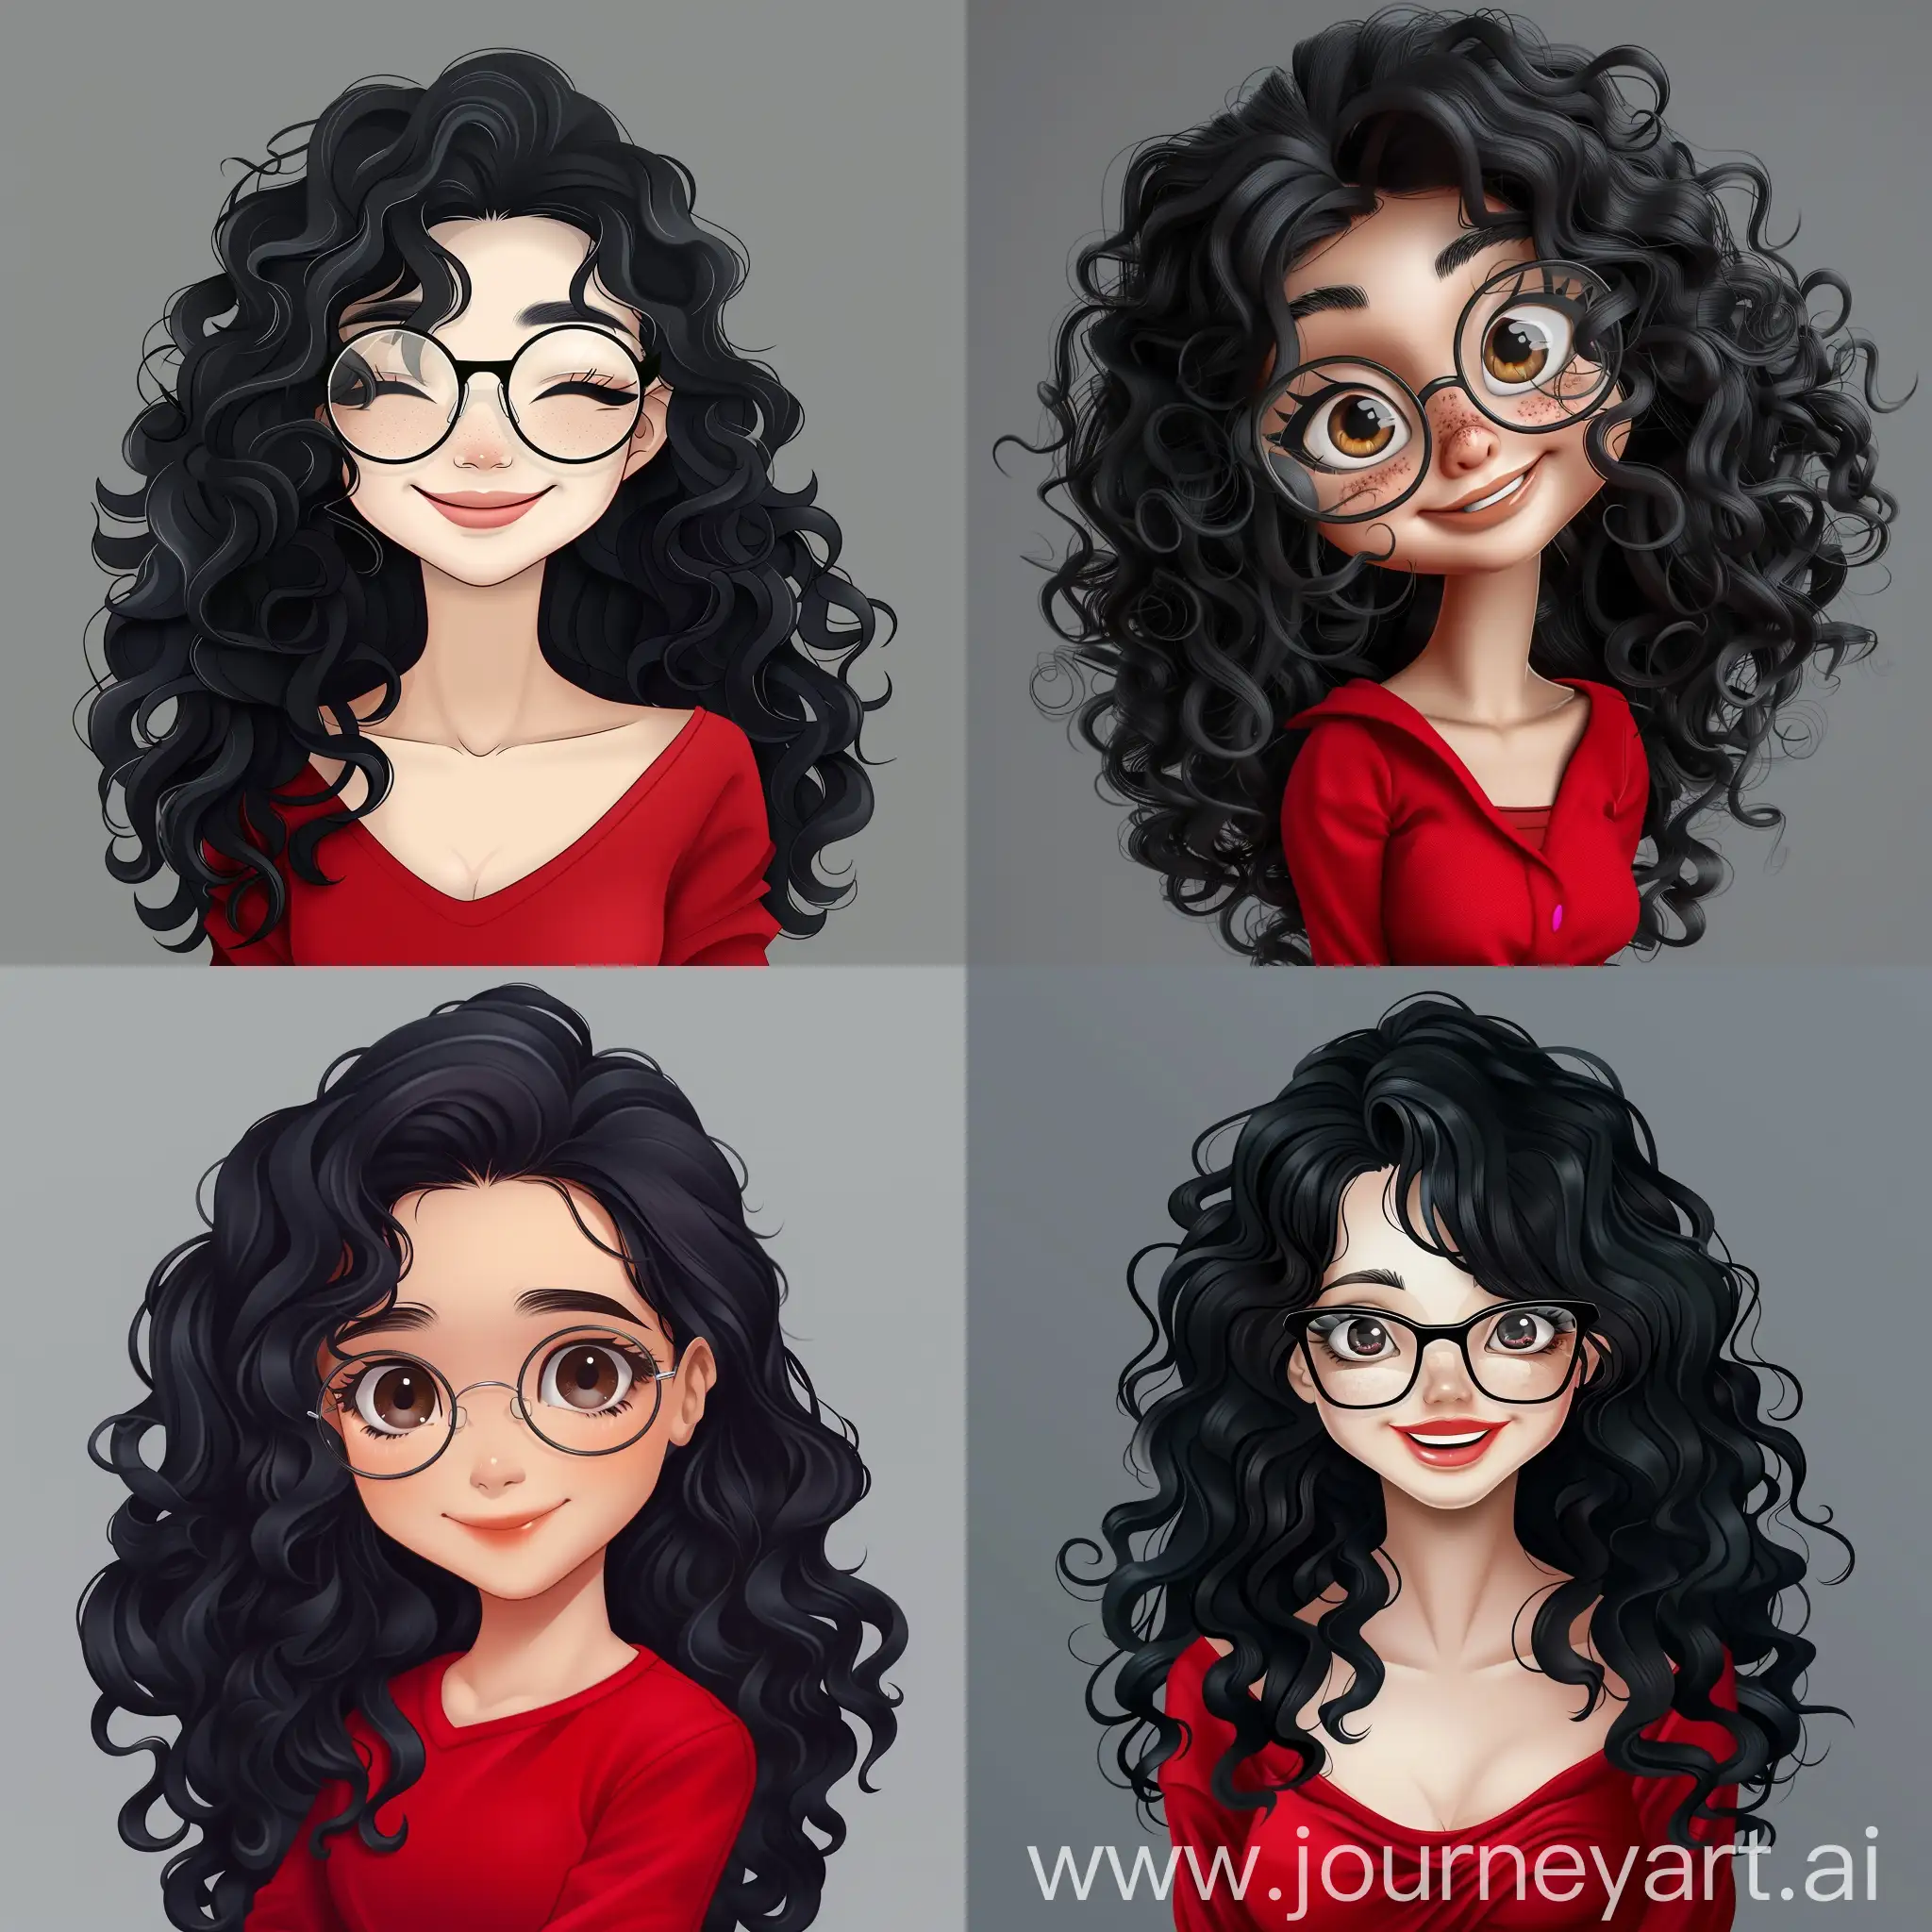 Anime-Style-3D-Manga-Character-30YearOld-Cute-Woman-with-Curly-Black-Hair-and-Glasses